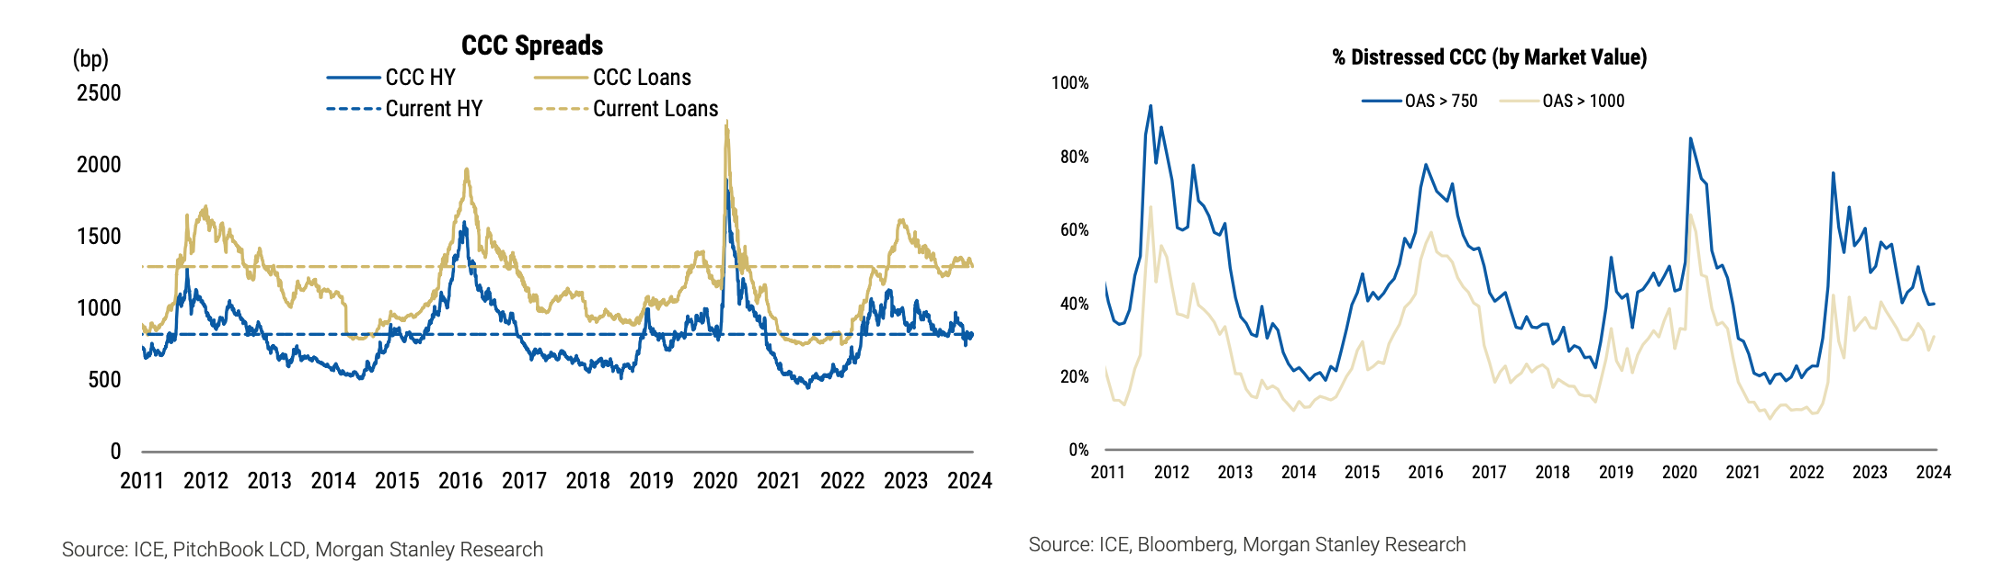 CCC Spreads and Distressed %